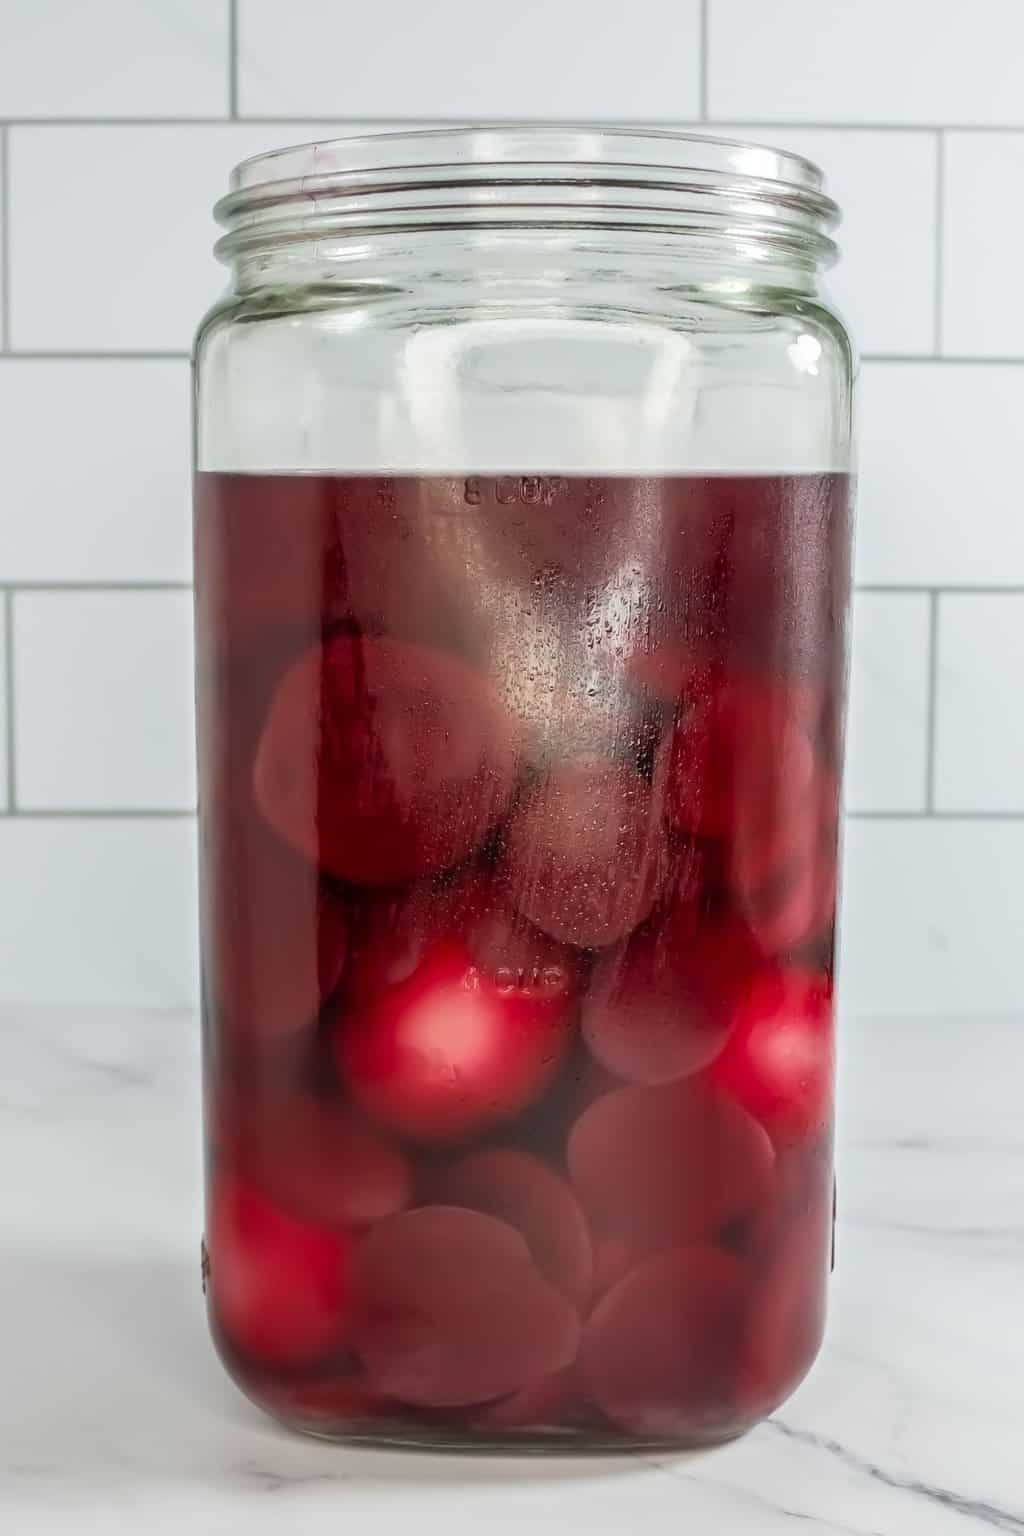 Eggs, beets in a glass jar with liquid.